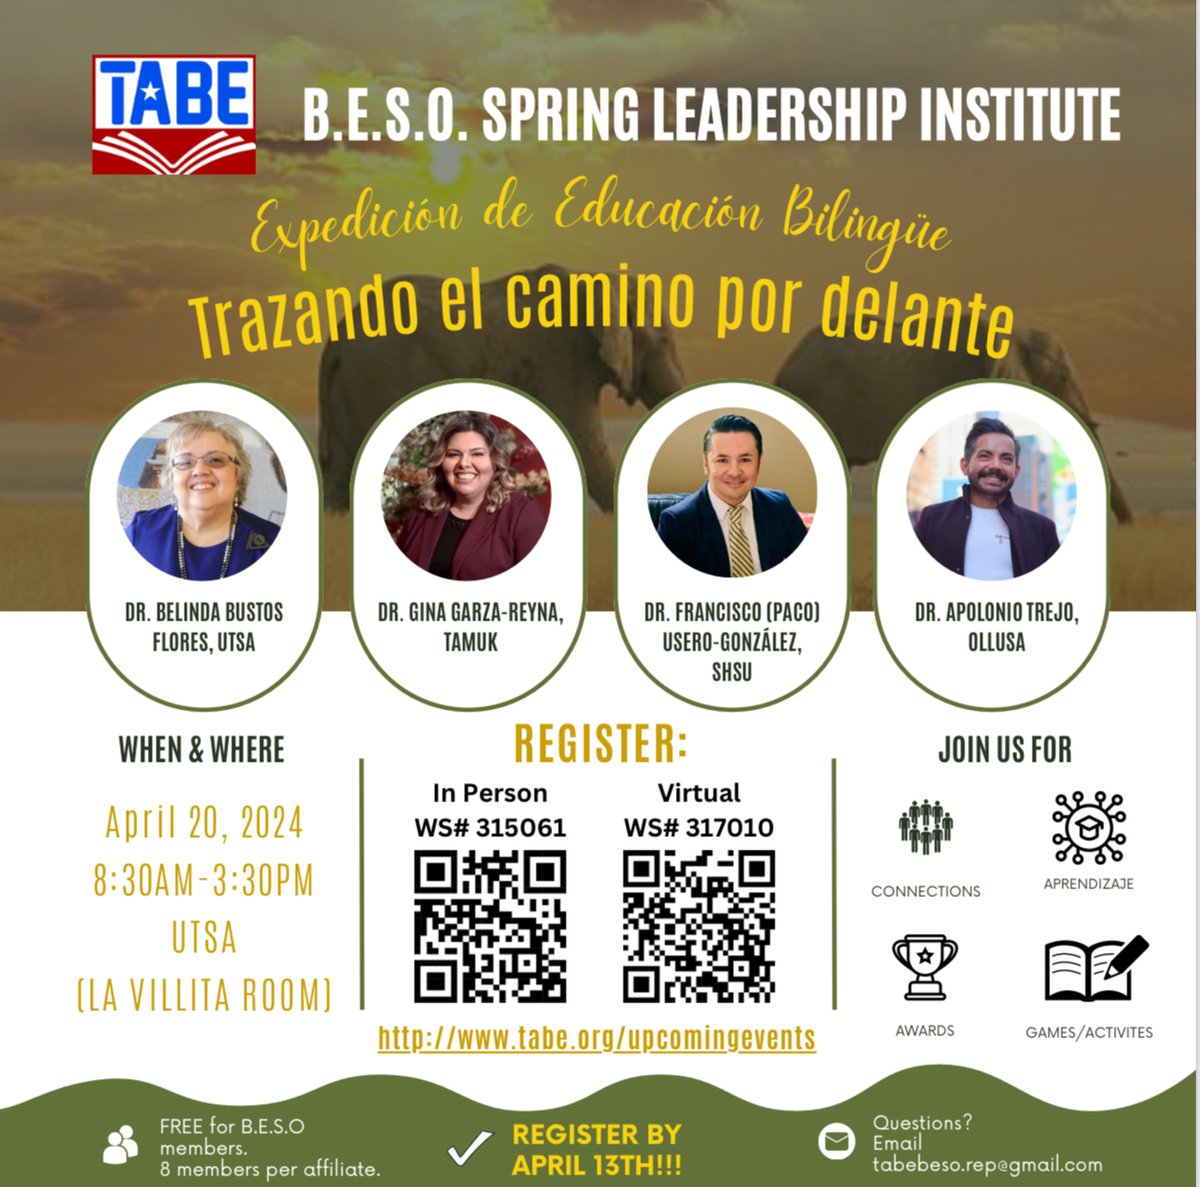 🐘BESO Spring Leadership Institute🐘 Thrilled to introduce our first guest speaker, Dr. Belinda Bustos Flores from UTSA! Join us at 9:00 AM as we delve into BESO's rich history with Dr. Flores leading the way. Register by April 13 --> tabe.org/upcomingevents/